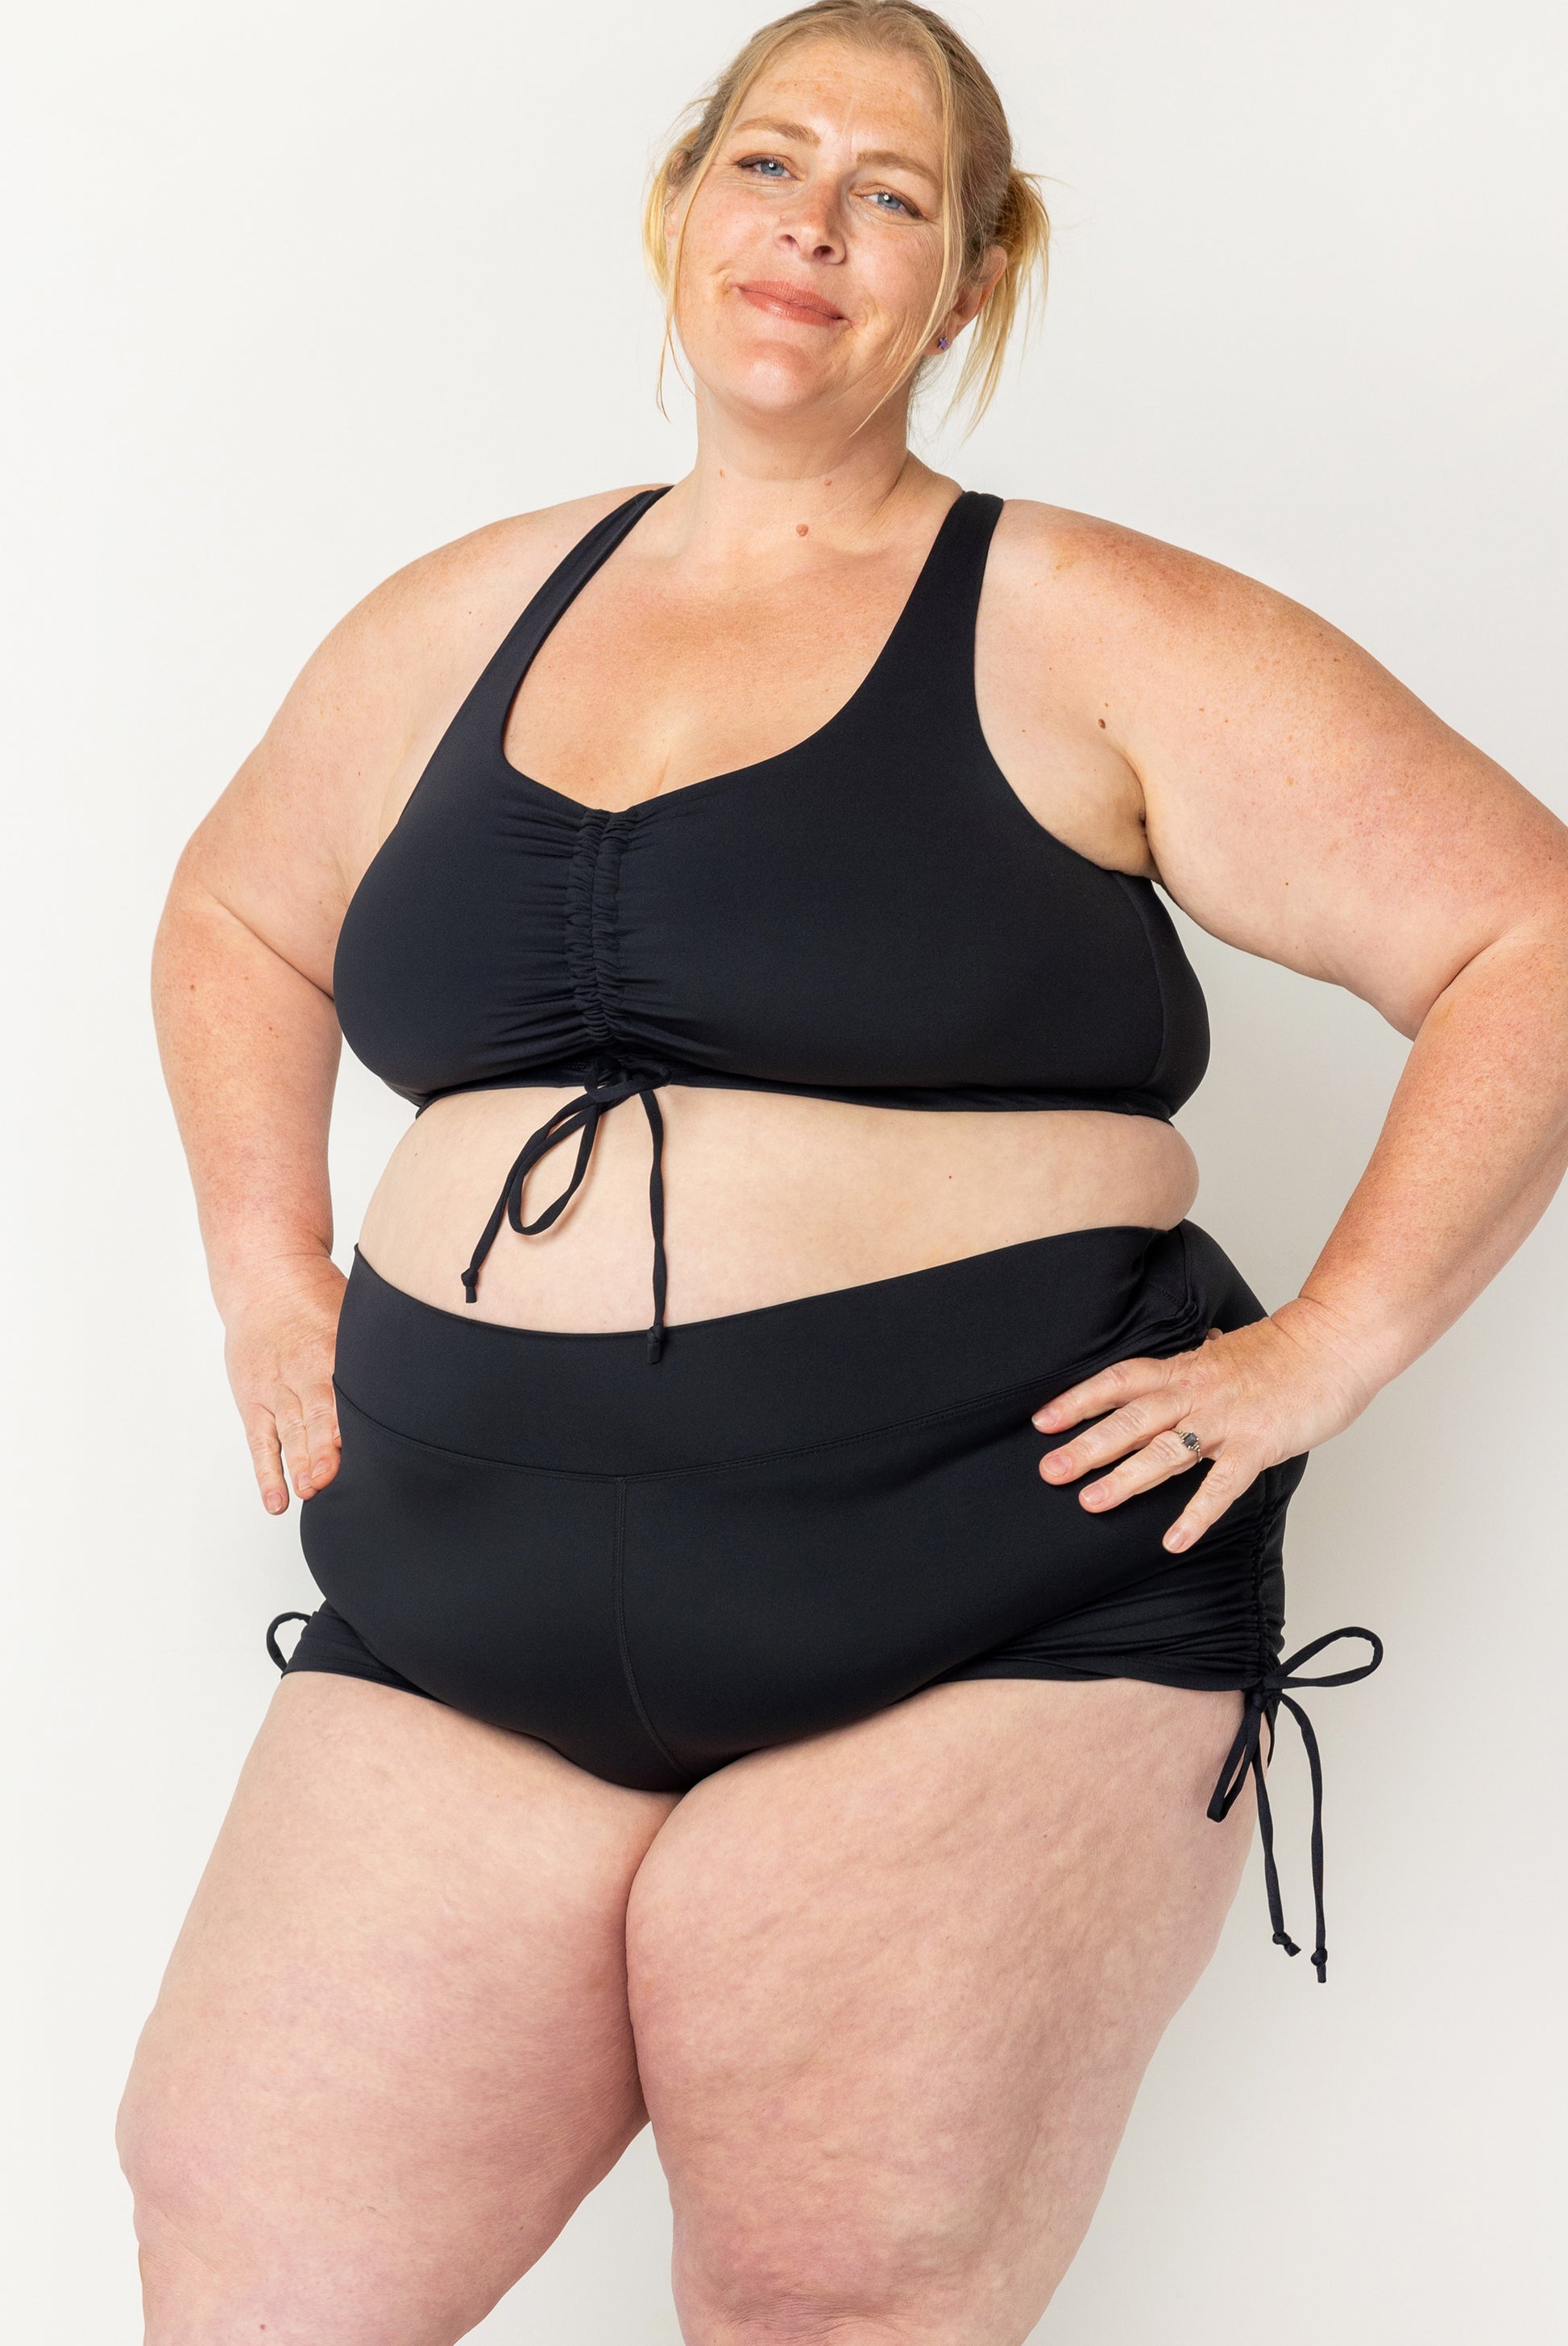 Plus size model wearing swim booty shorts with adjustable sides cinched up in size 4X.